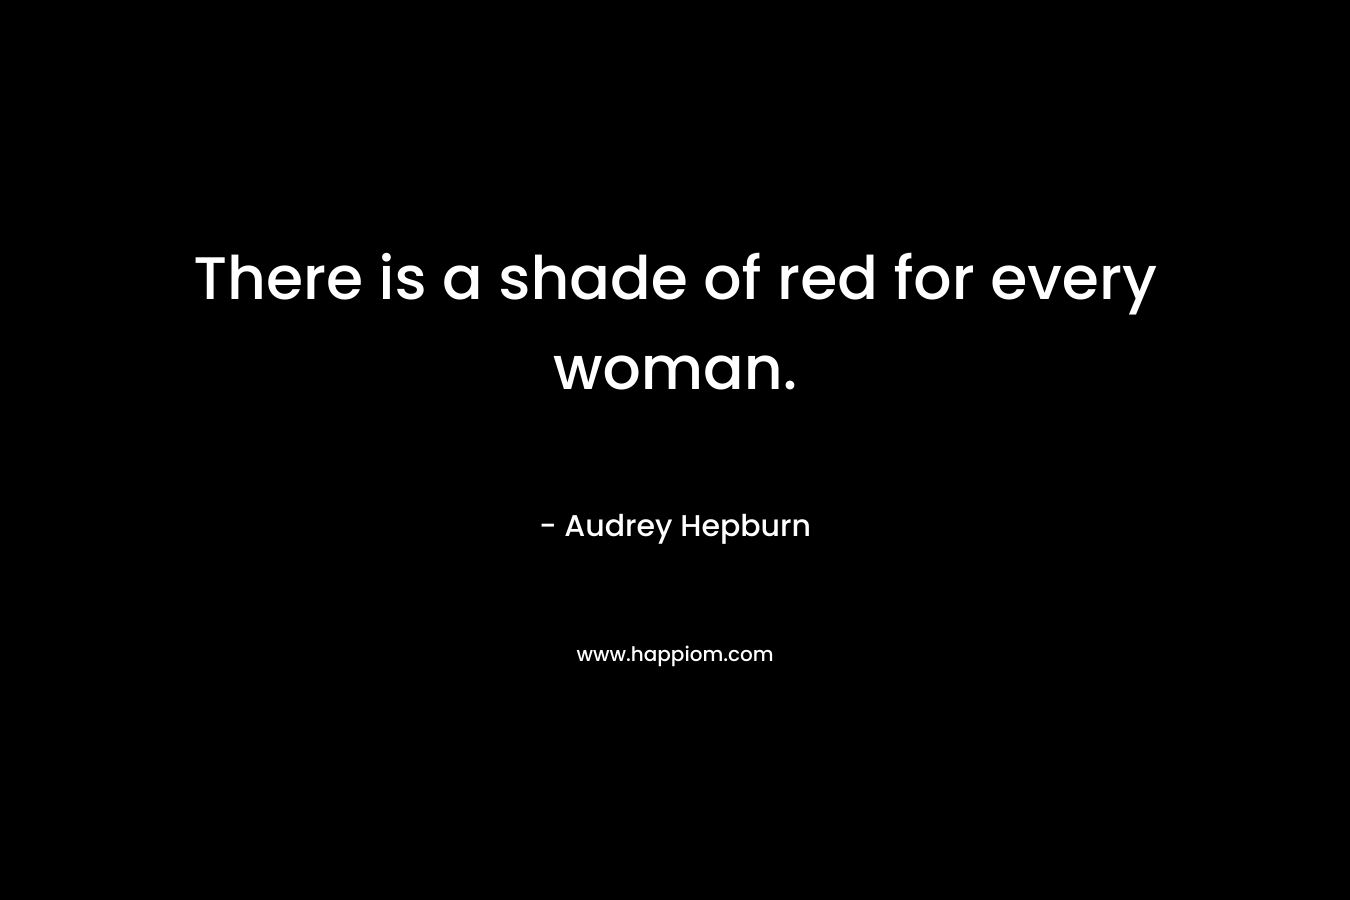 There is a shade of red for every woman.